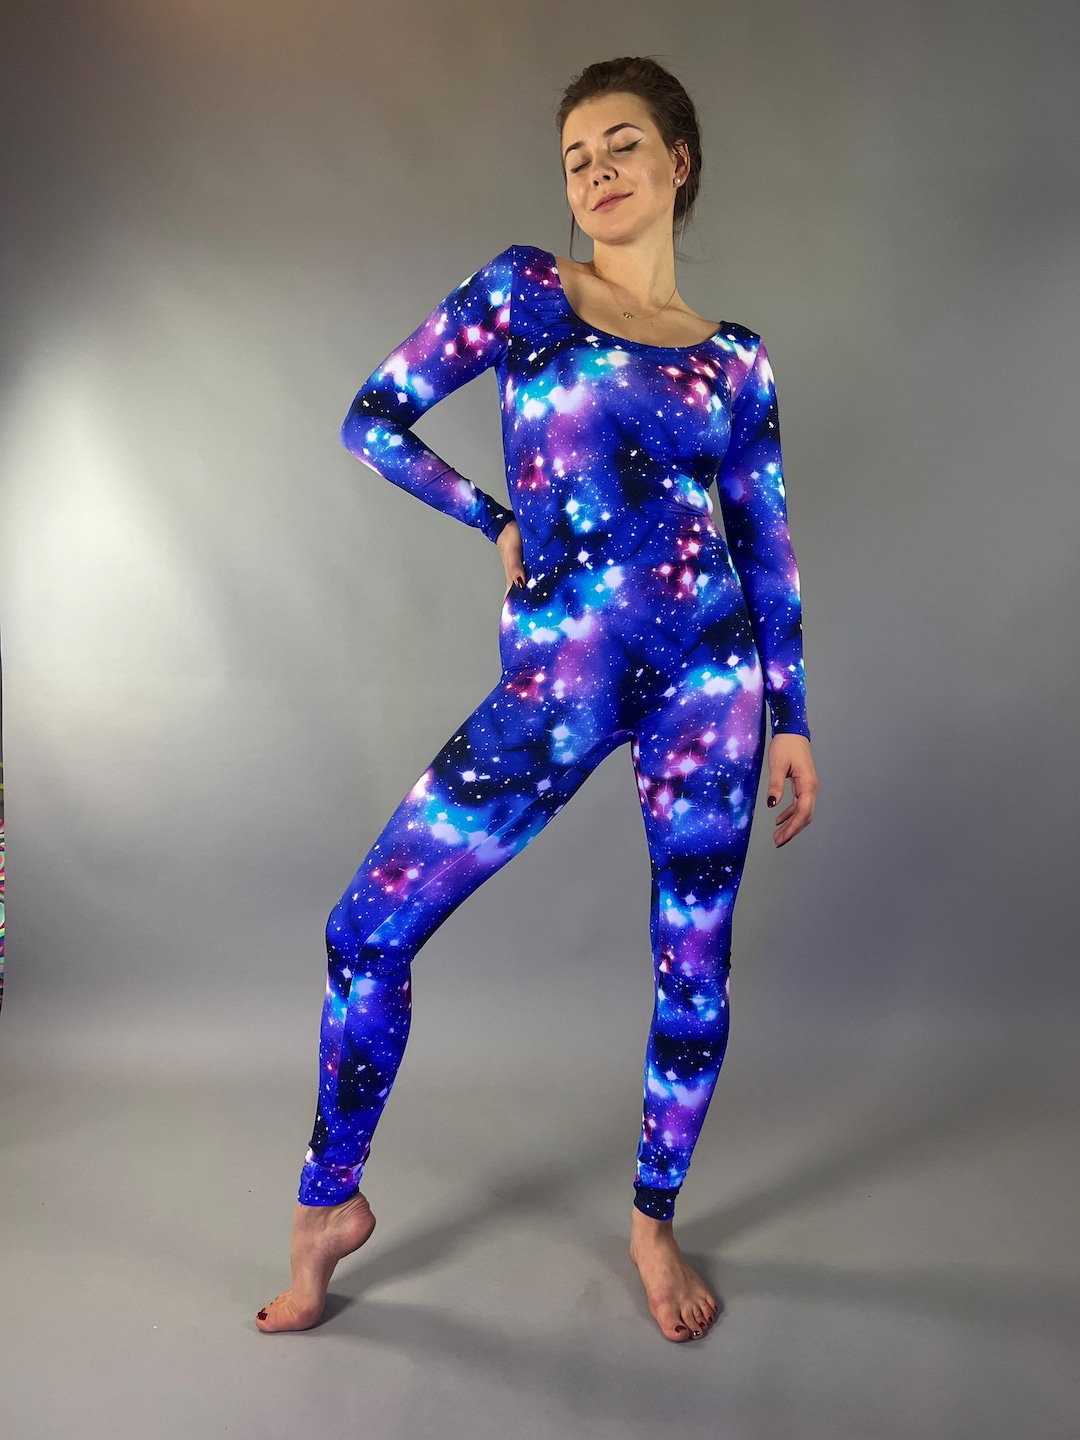 Cosmos Bodysuit for Woman or Man,beautiful Galactic Cosplay for ...